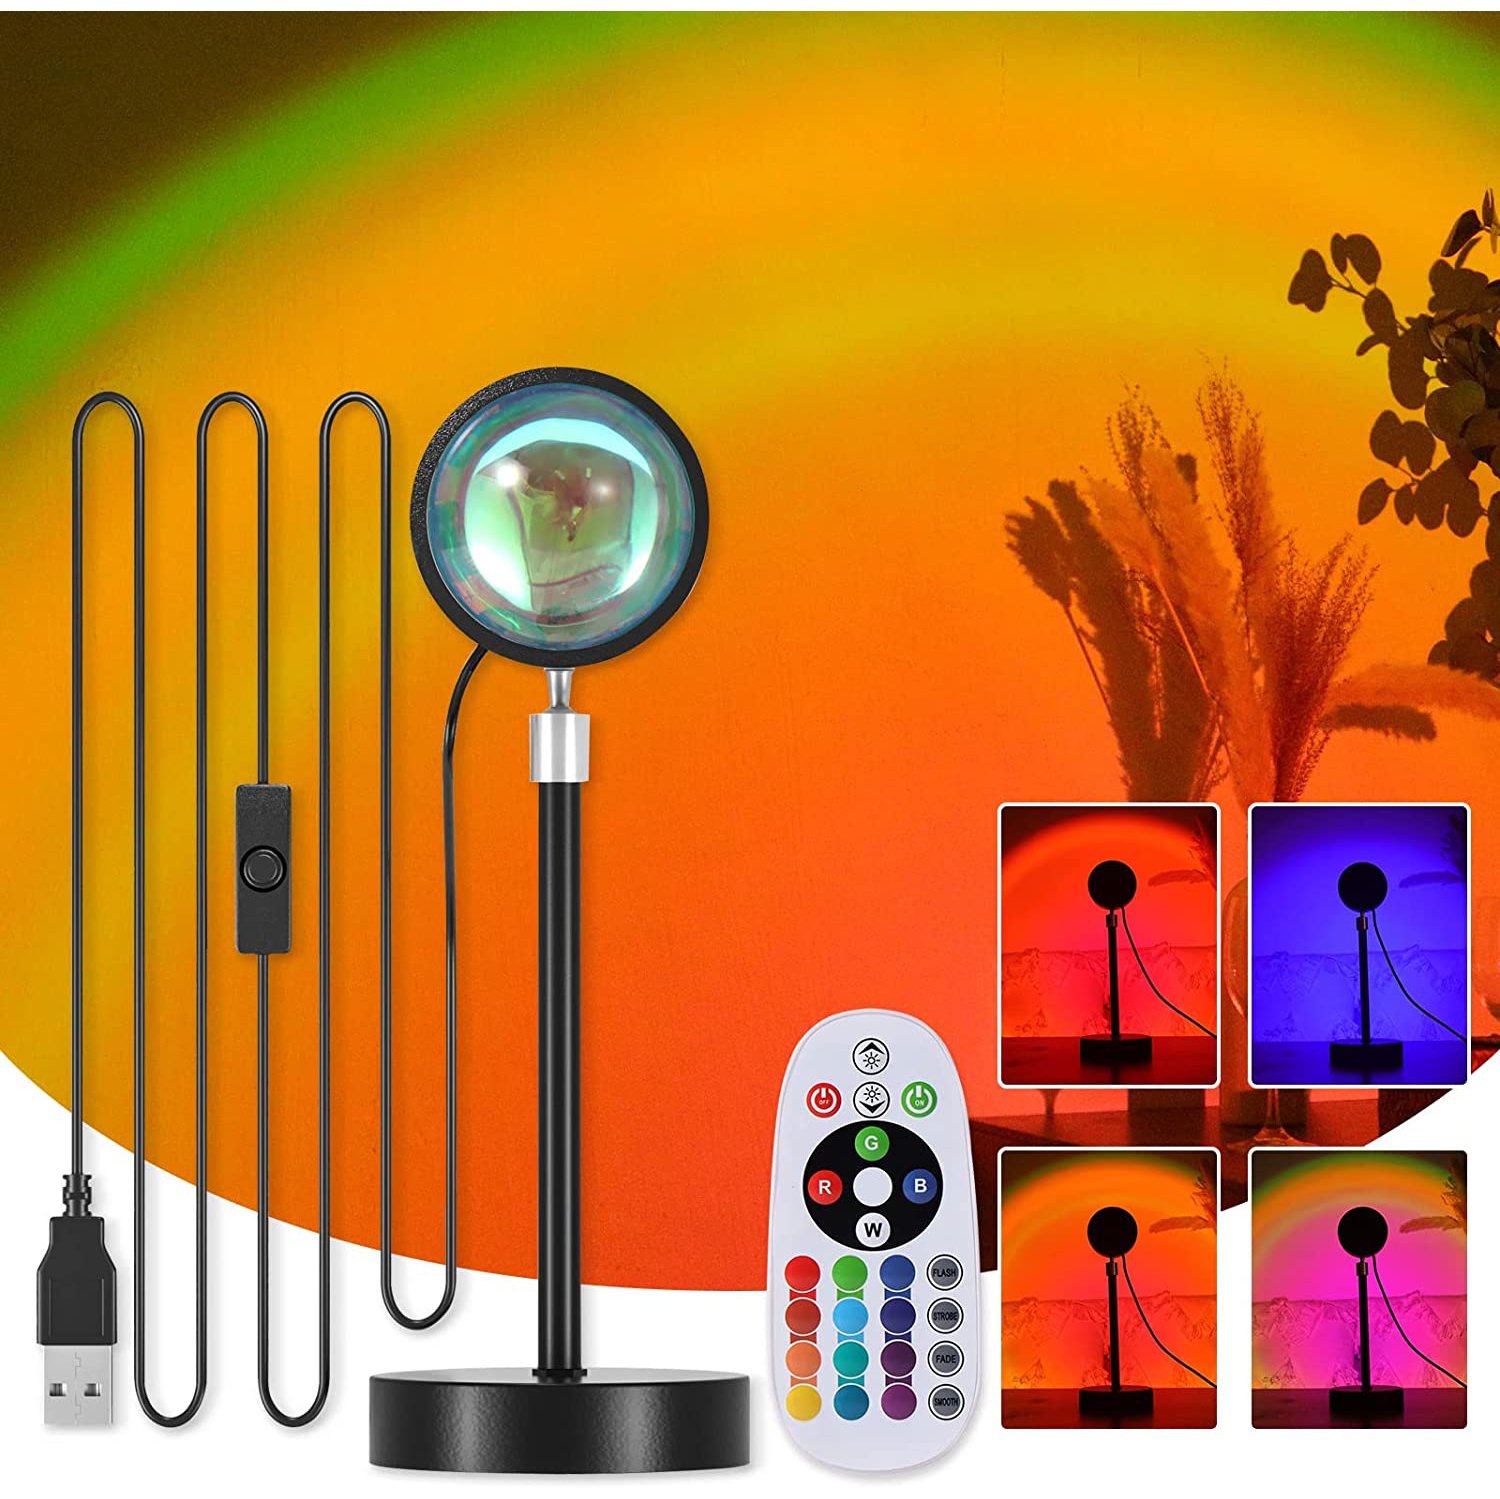 CASA Sunset Lamp Projector with 16 Colors & 4 Modes - App & Remote Control LED Projector Party Lights & Neon Lights - Sunlight Lamp Sunset Light Projector - Sun Light Sun Lamp